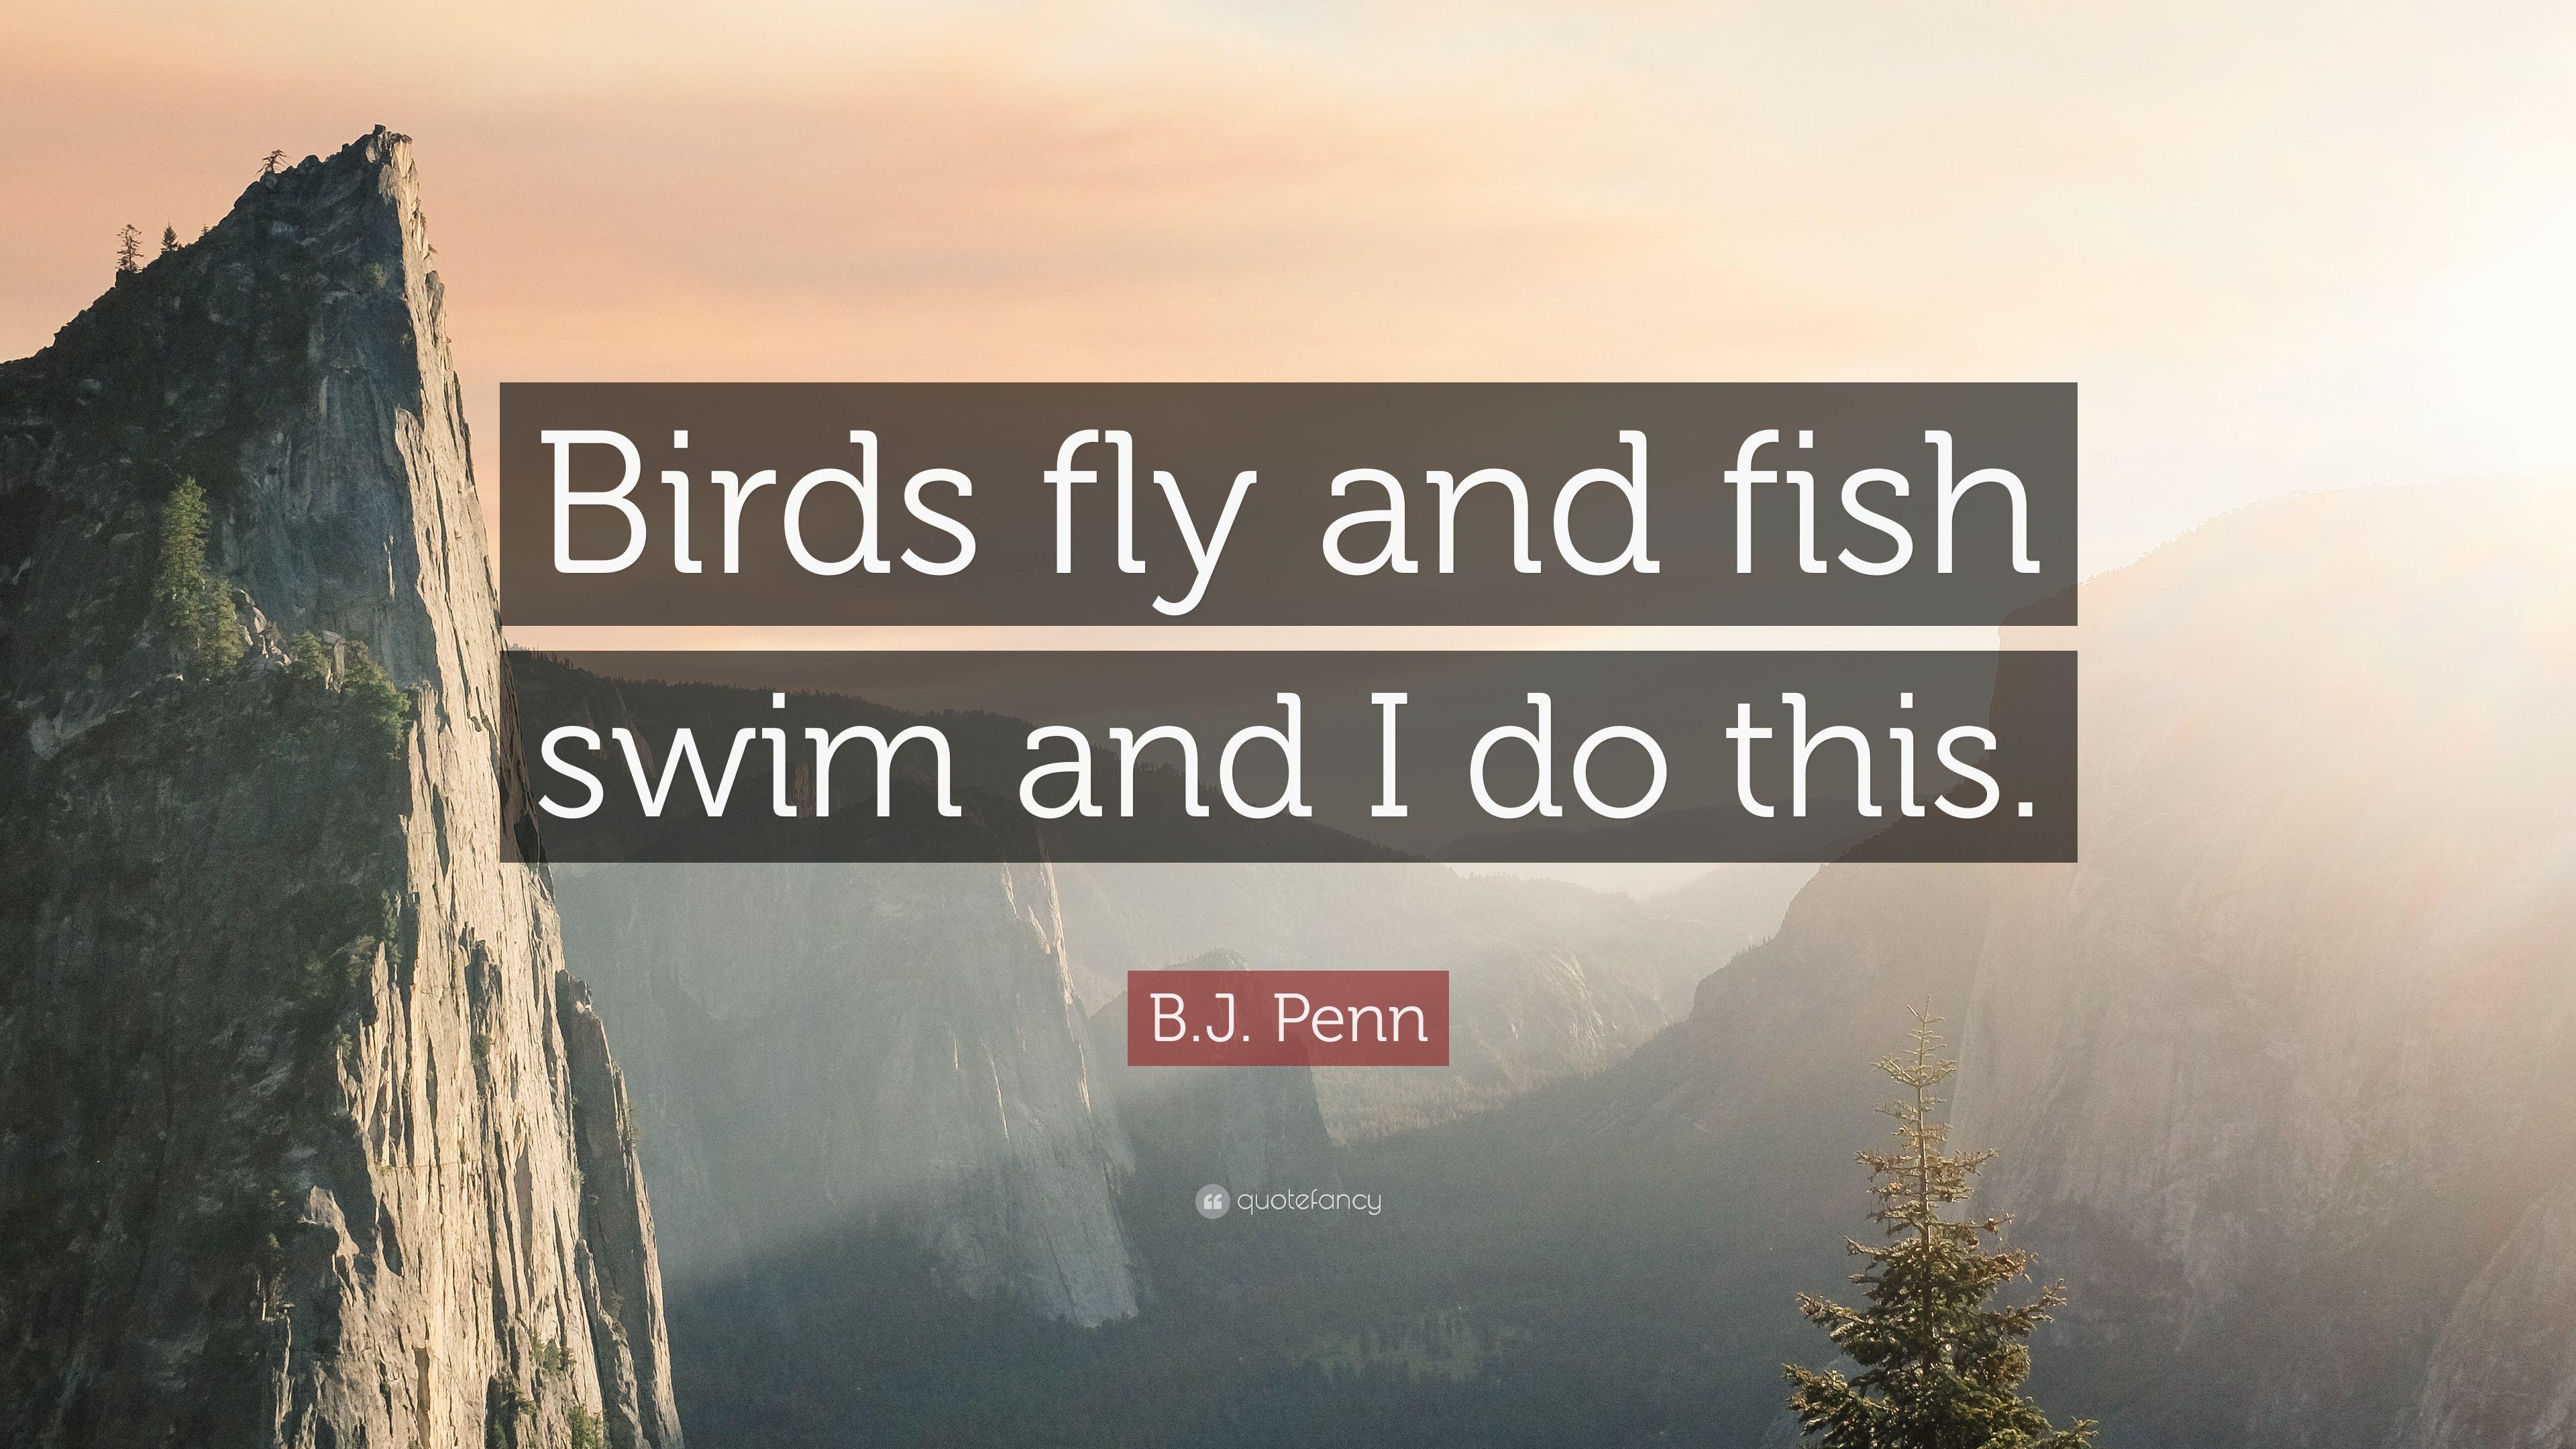 B.J. Penn Quote: “Birds fly and fish swim and I do this.” 7